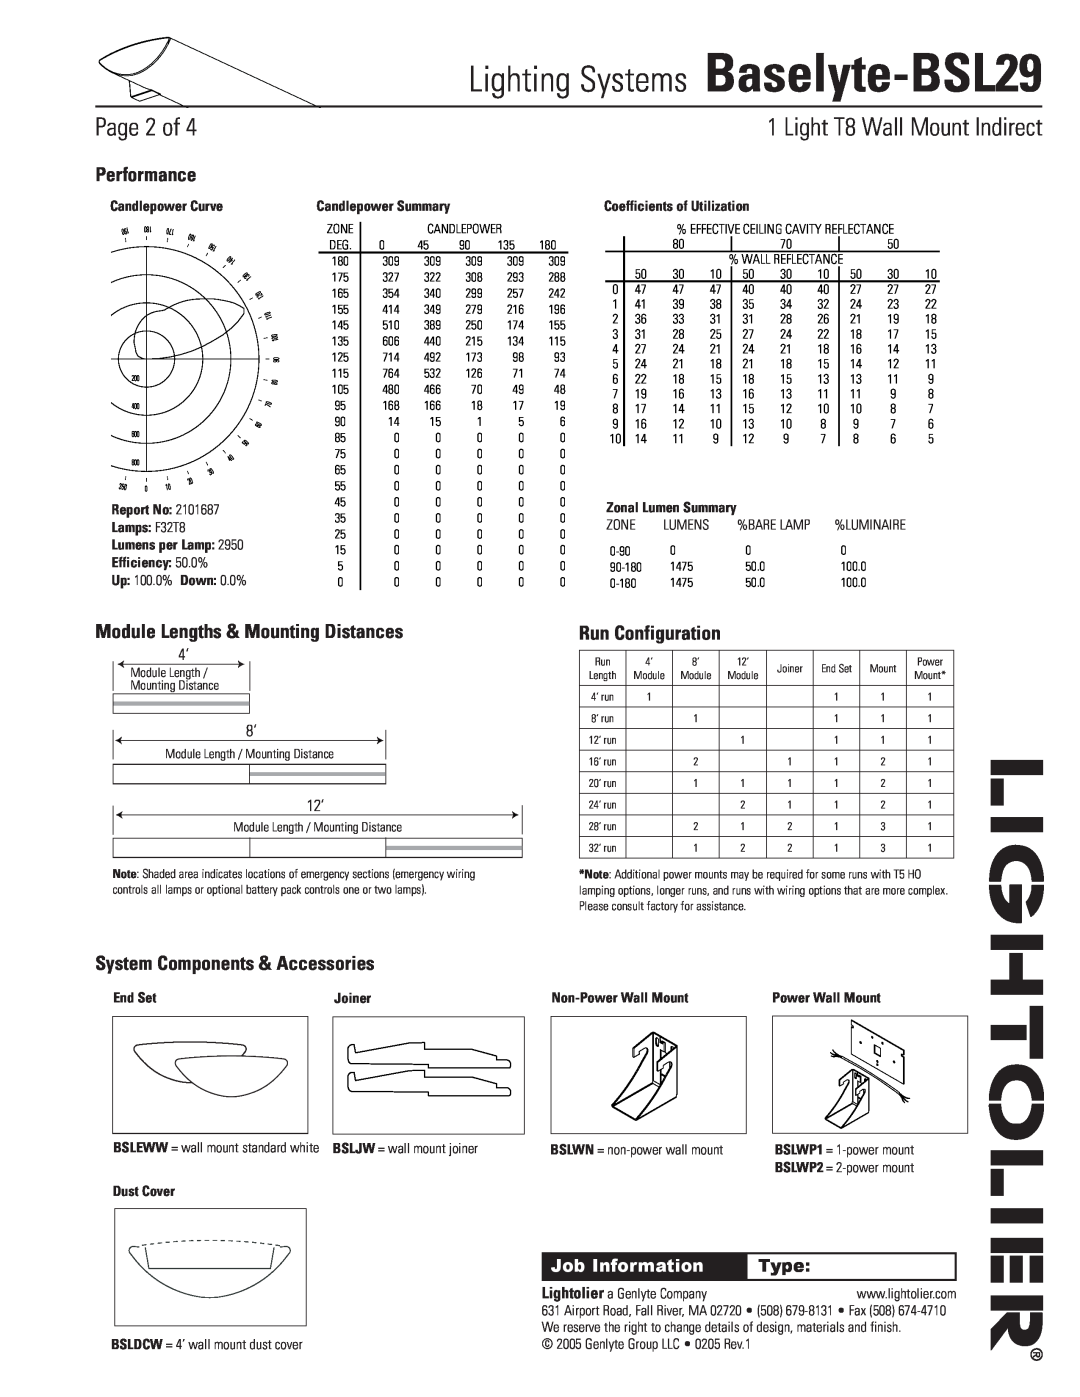 Lightolier Baselyte-BSL29 Page of,  Light T8 Wall Mount Indirect, Performance, Module Lengths & Mounting Distances, Type 